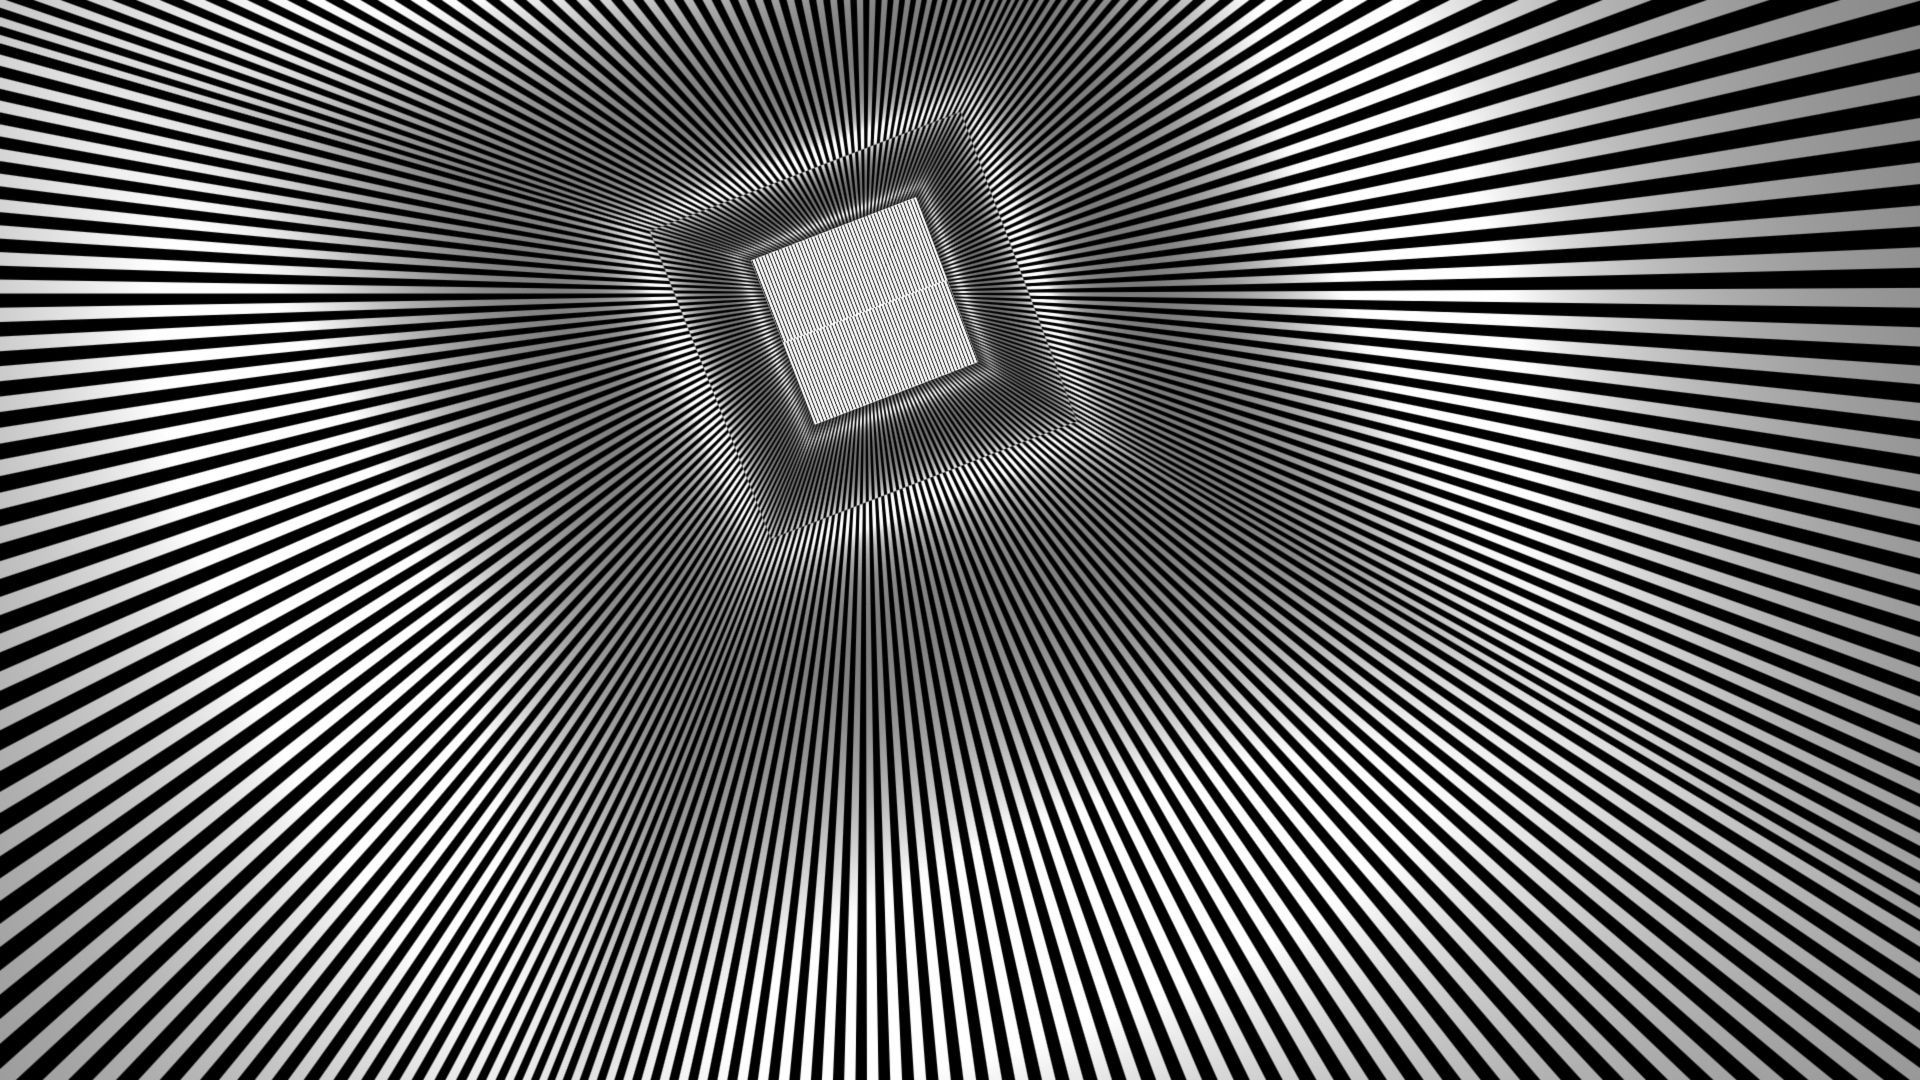 Square Rays optical Illusion teaser psychedelic wallpaper